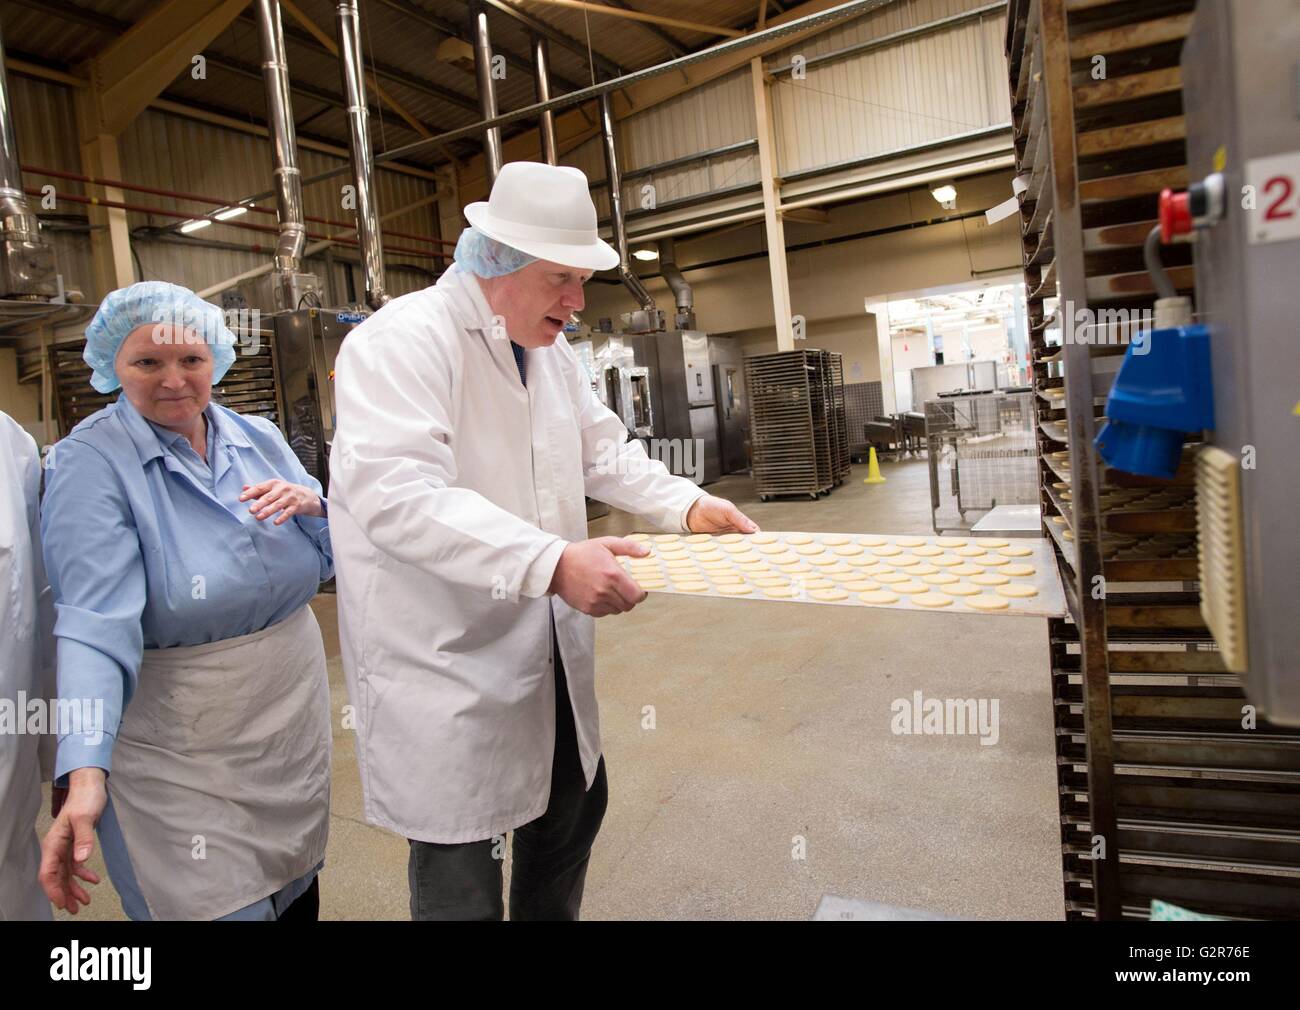 Boris Johnson during a visit to Farmhouse Biscuits in Nelson, Lancashire, where he along with Priti Patel and Michael Gove were campaigning on behalf of the Vote Leave EU referendum campaign. Stock Photo